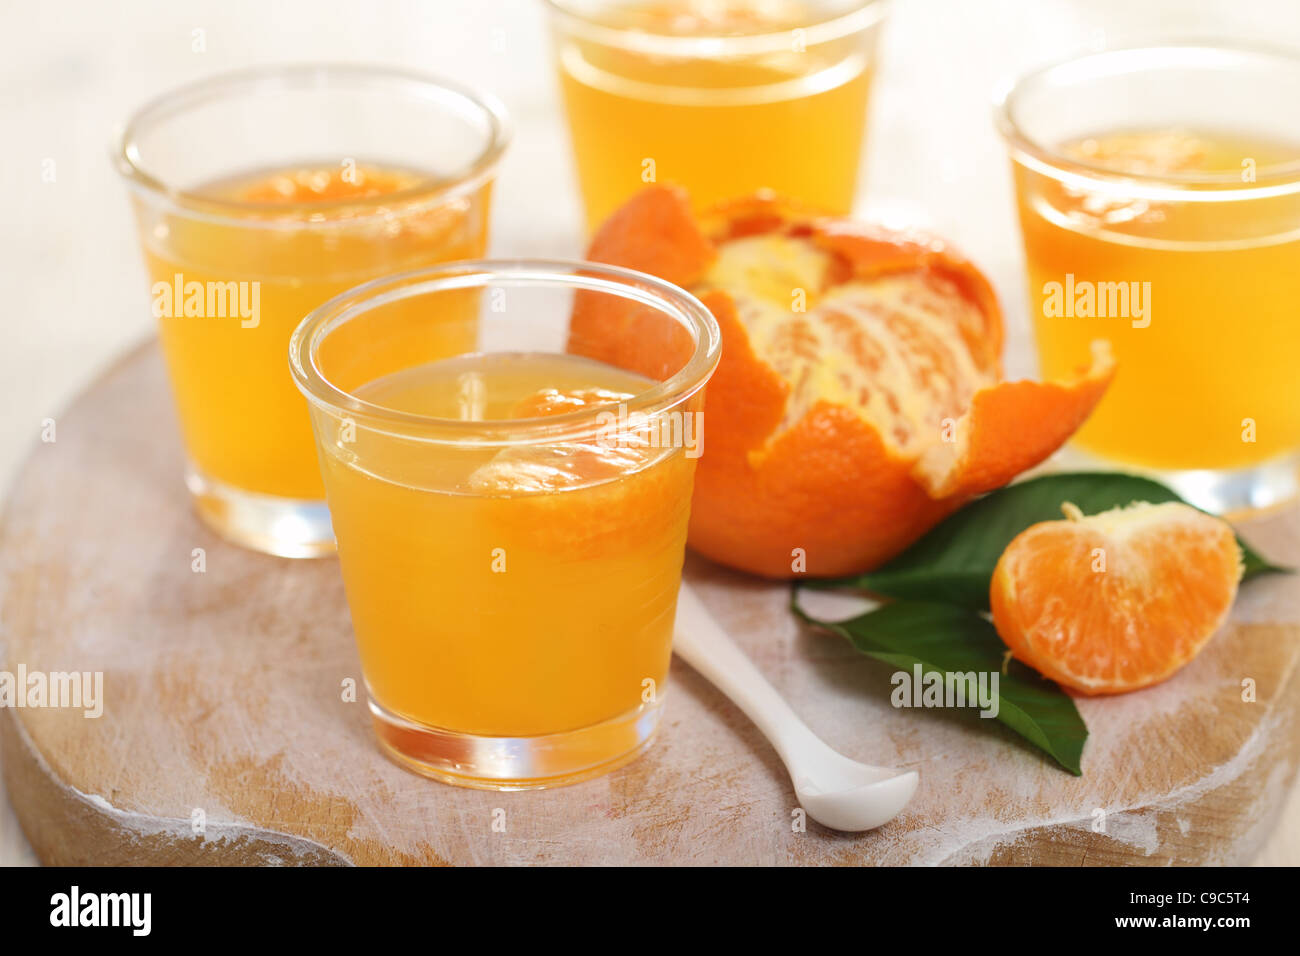 Fruit tangerine jelly in the glass bowl Stock Photo